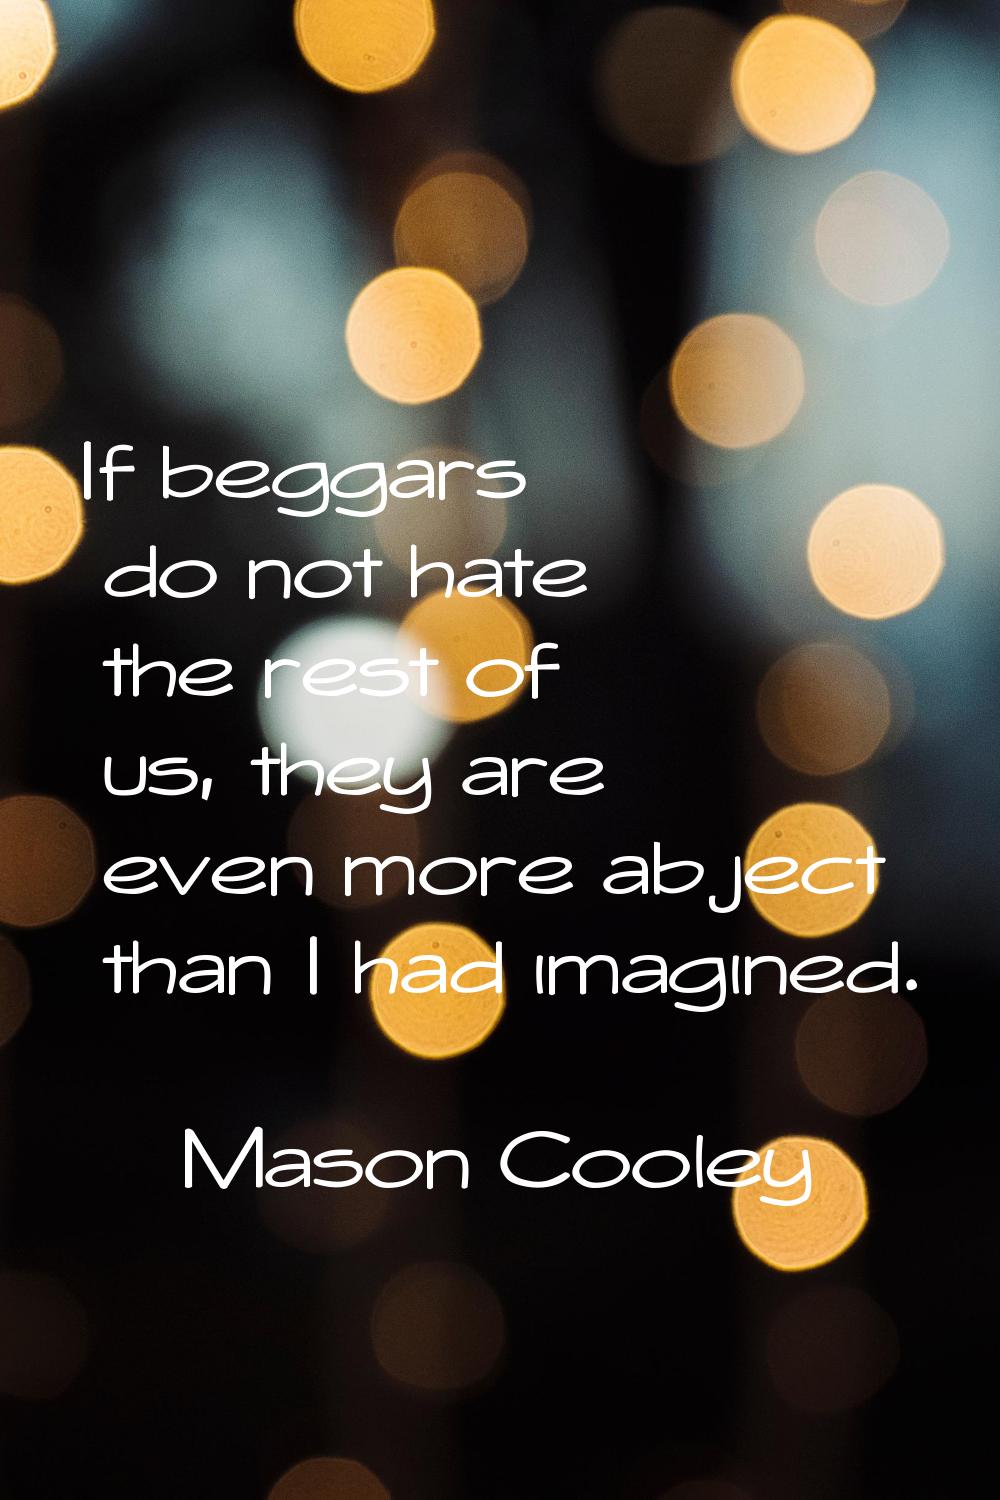 If beggars do not hate the rest of us, they are even more abject than I had imagined.